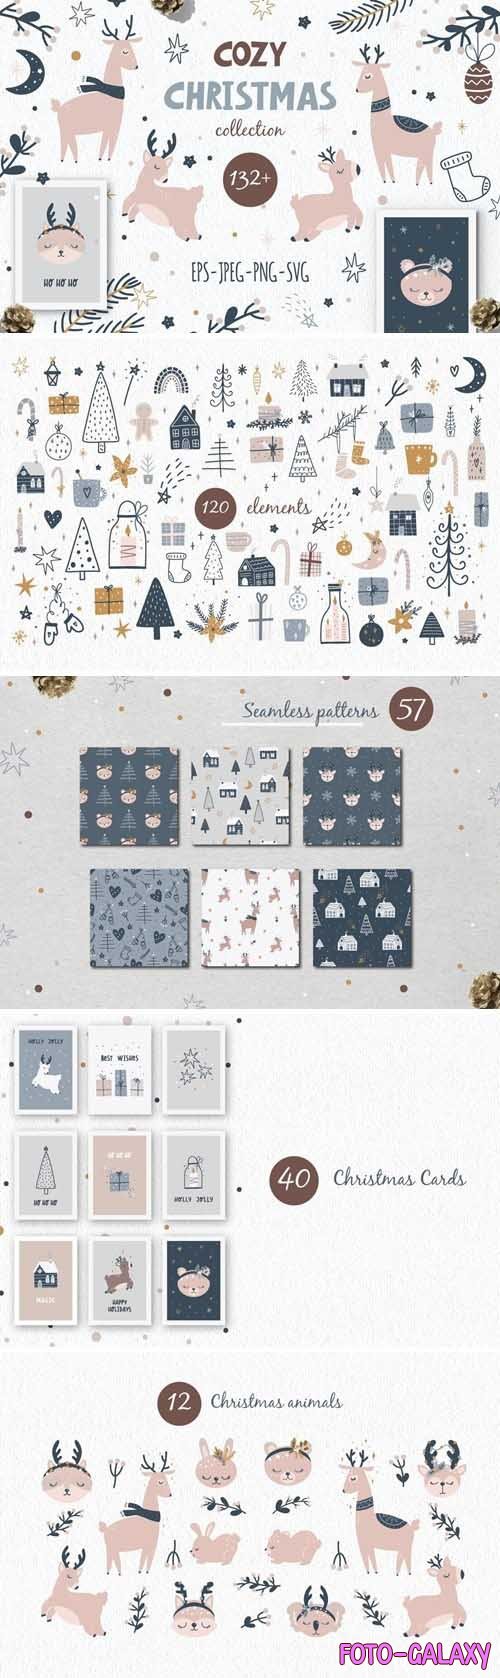 Cozy Christmas collection. Christmas elements